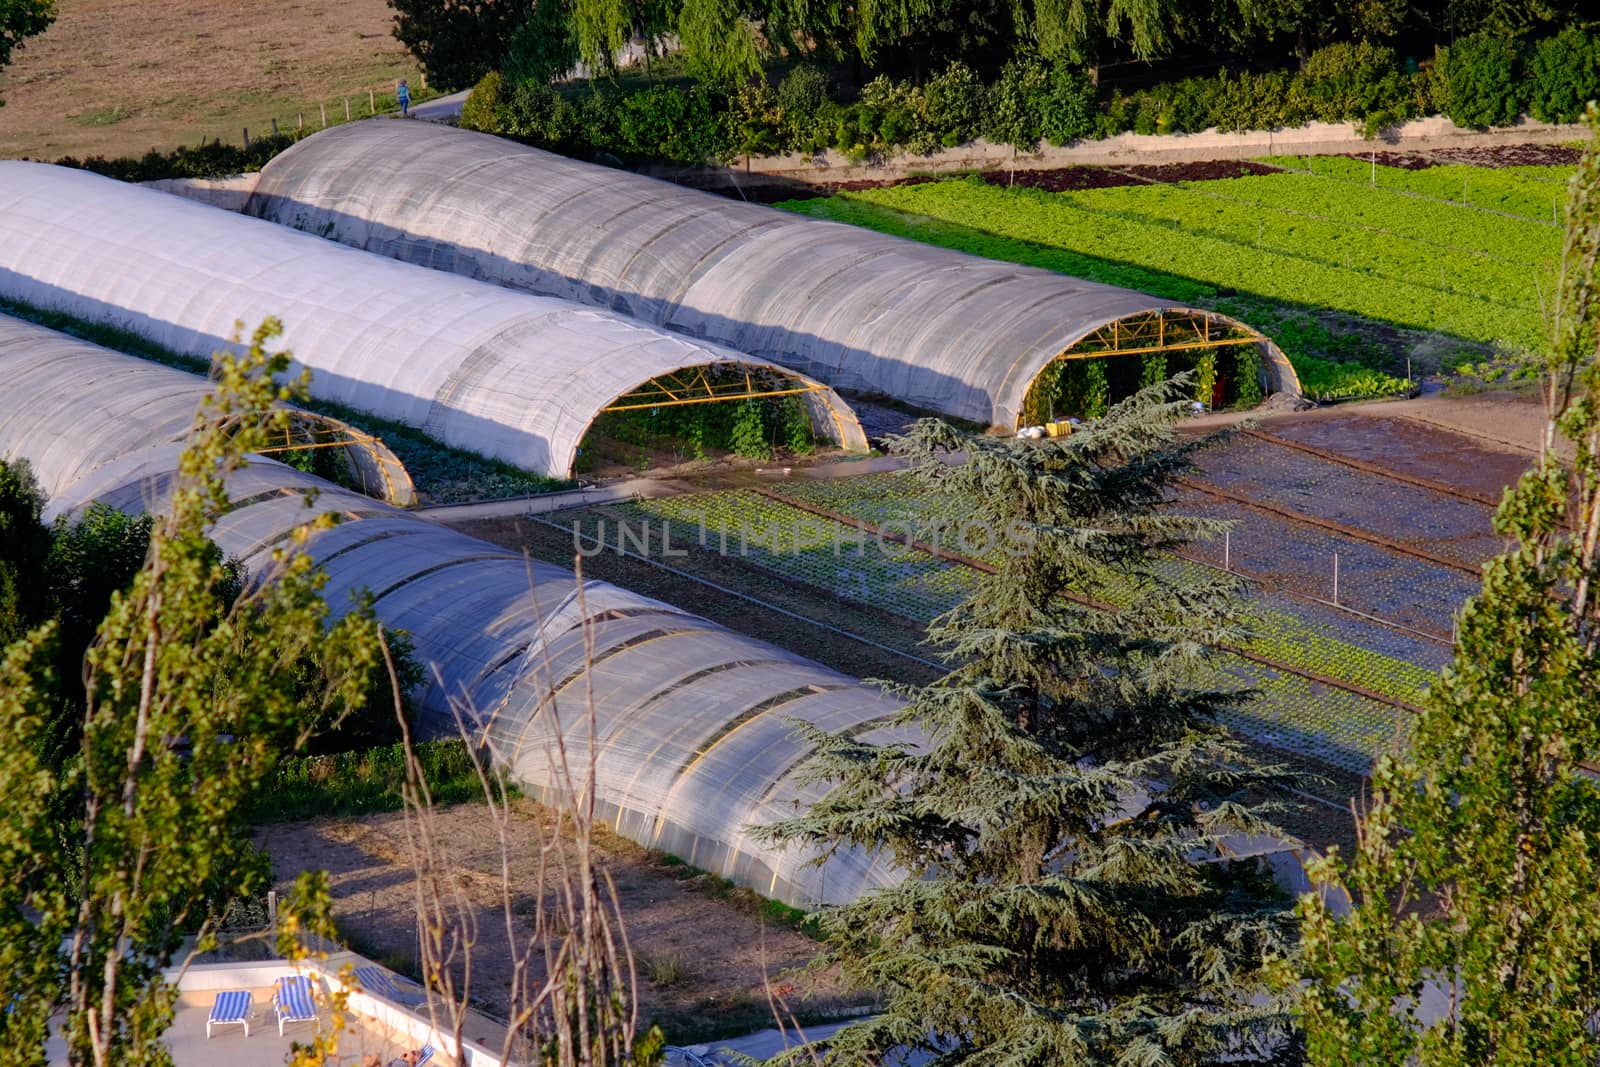 Greenhouses surrounded by green fields in Pamplona, Spain by mikelju